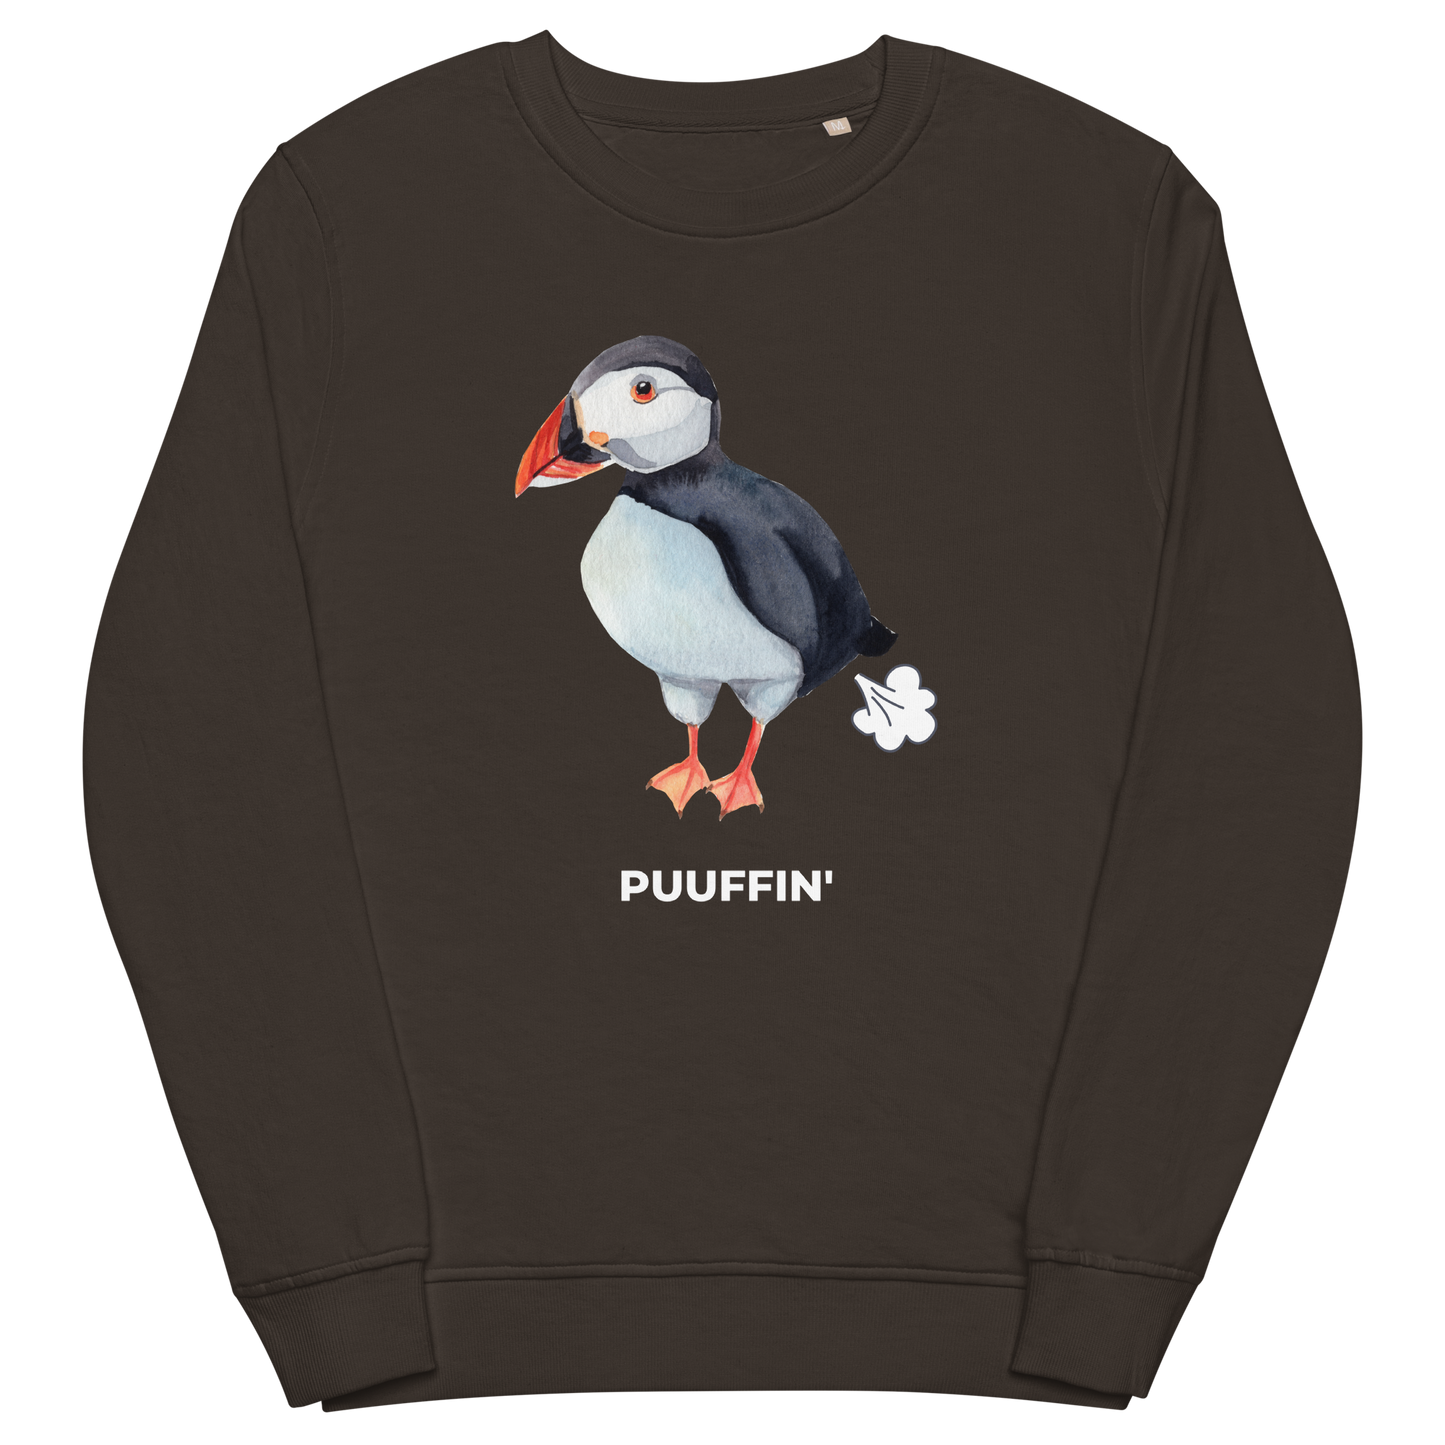 Deep Charcoal Grey Organic Cotton Puffin Sweatshirt featuring a comic Puuffin' graphic on the chest - Funny Graphic Puffin Sweatshirts - Boozy Fox